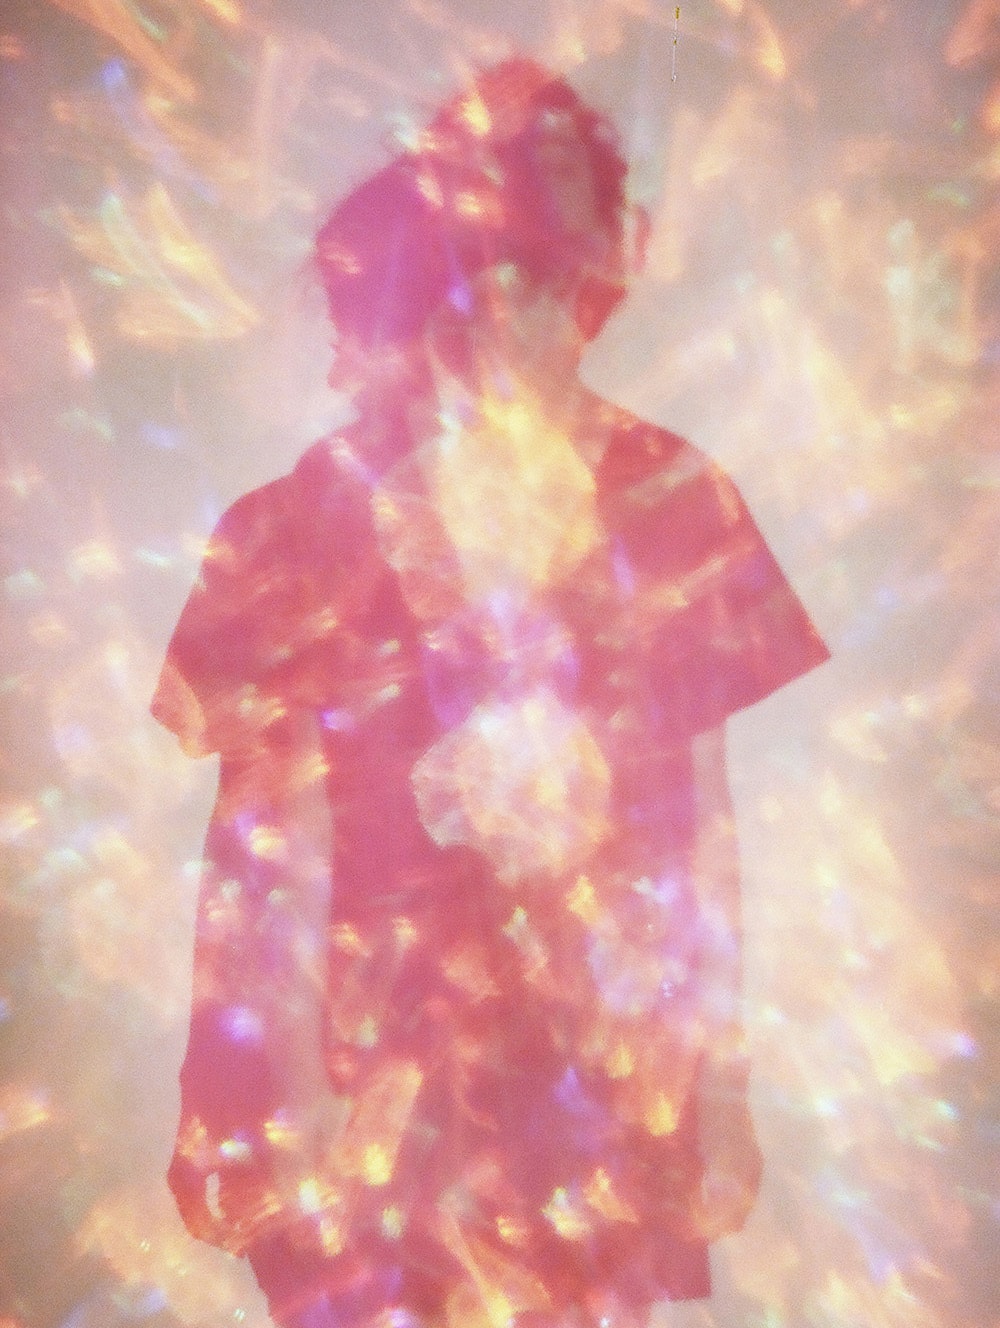 Back view of a woman. Double exposure 35 mm film shot. Pink sparkling background.